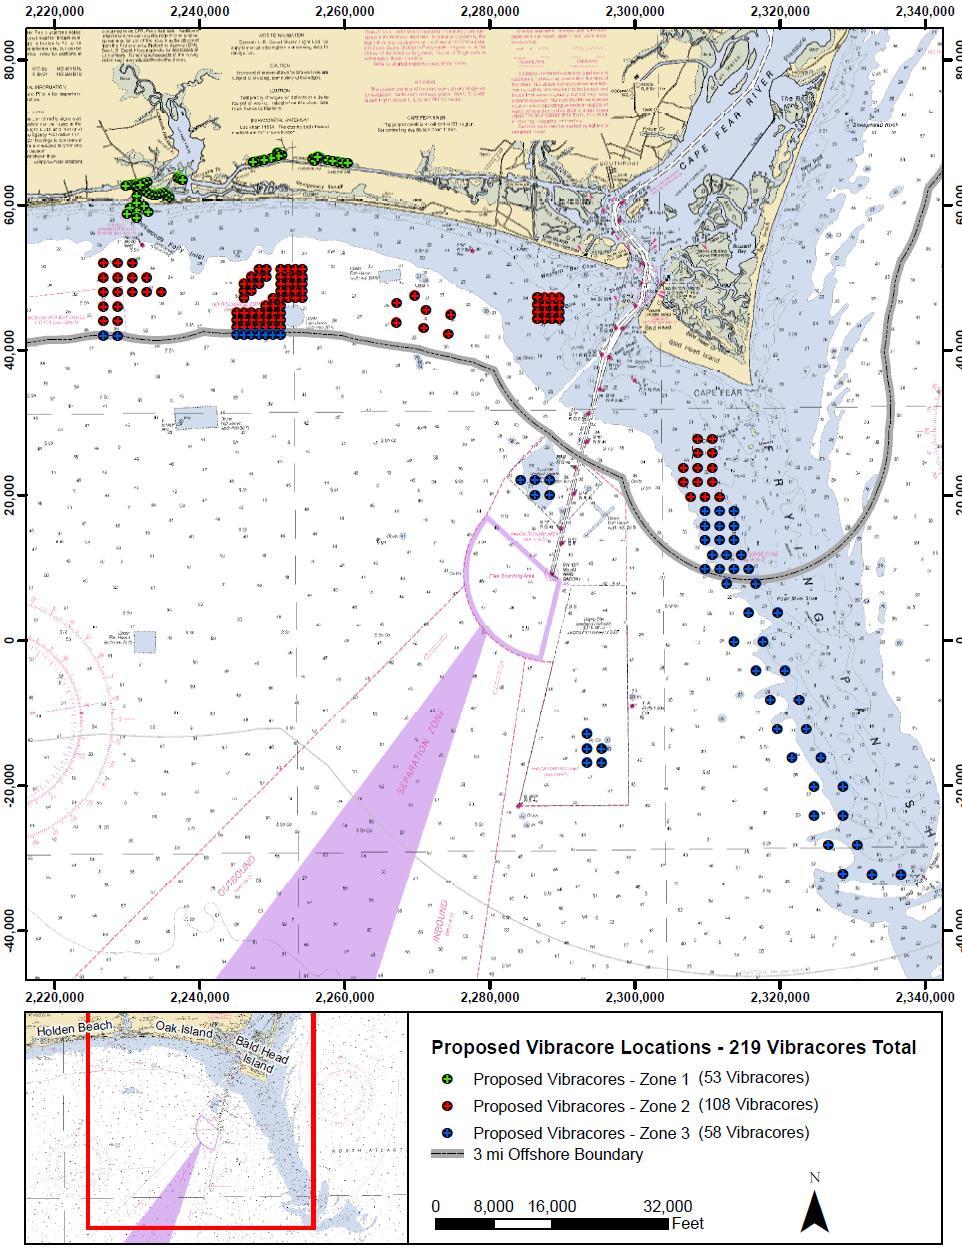 Overview of Master Plan Field Investigations Geotechnical vibracoring for sediment compatibility November 2018 vibracores Eastern Channel, LFI, AIWW bend widener Jan-Mar 2019